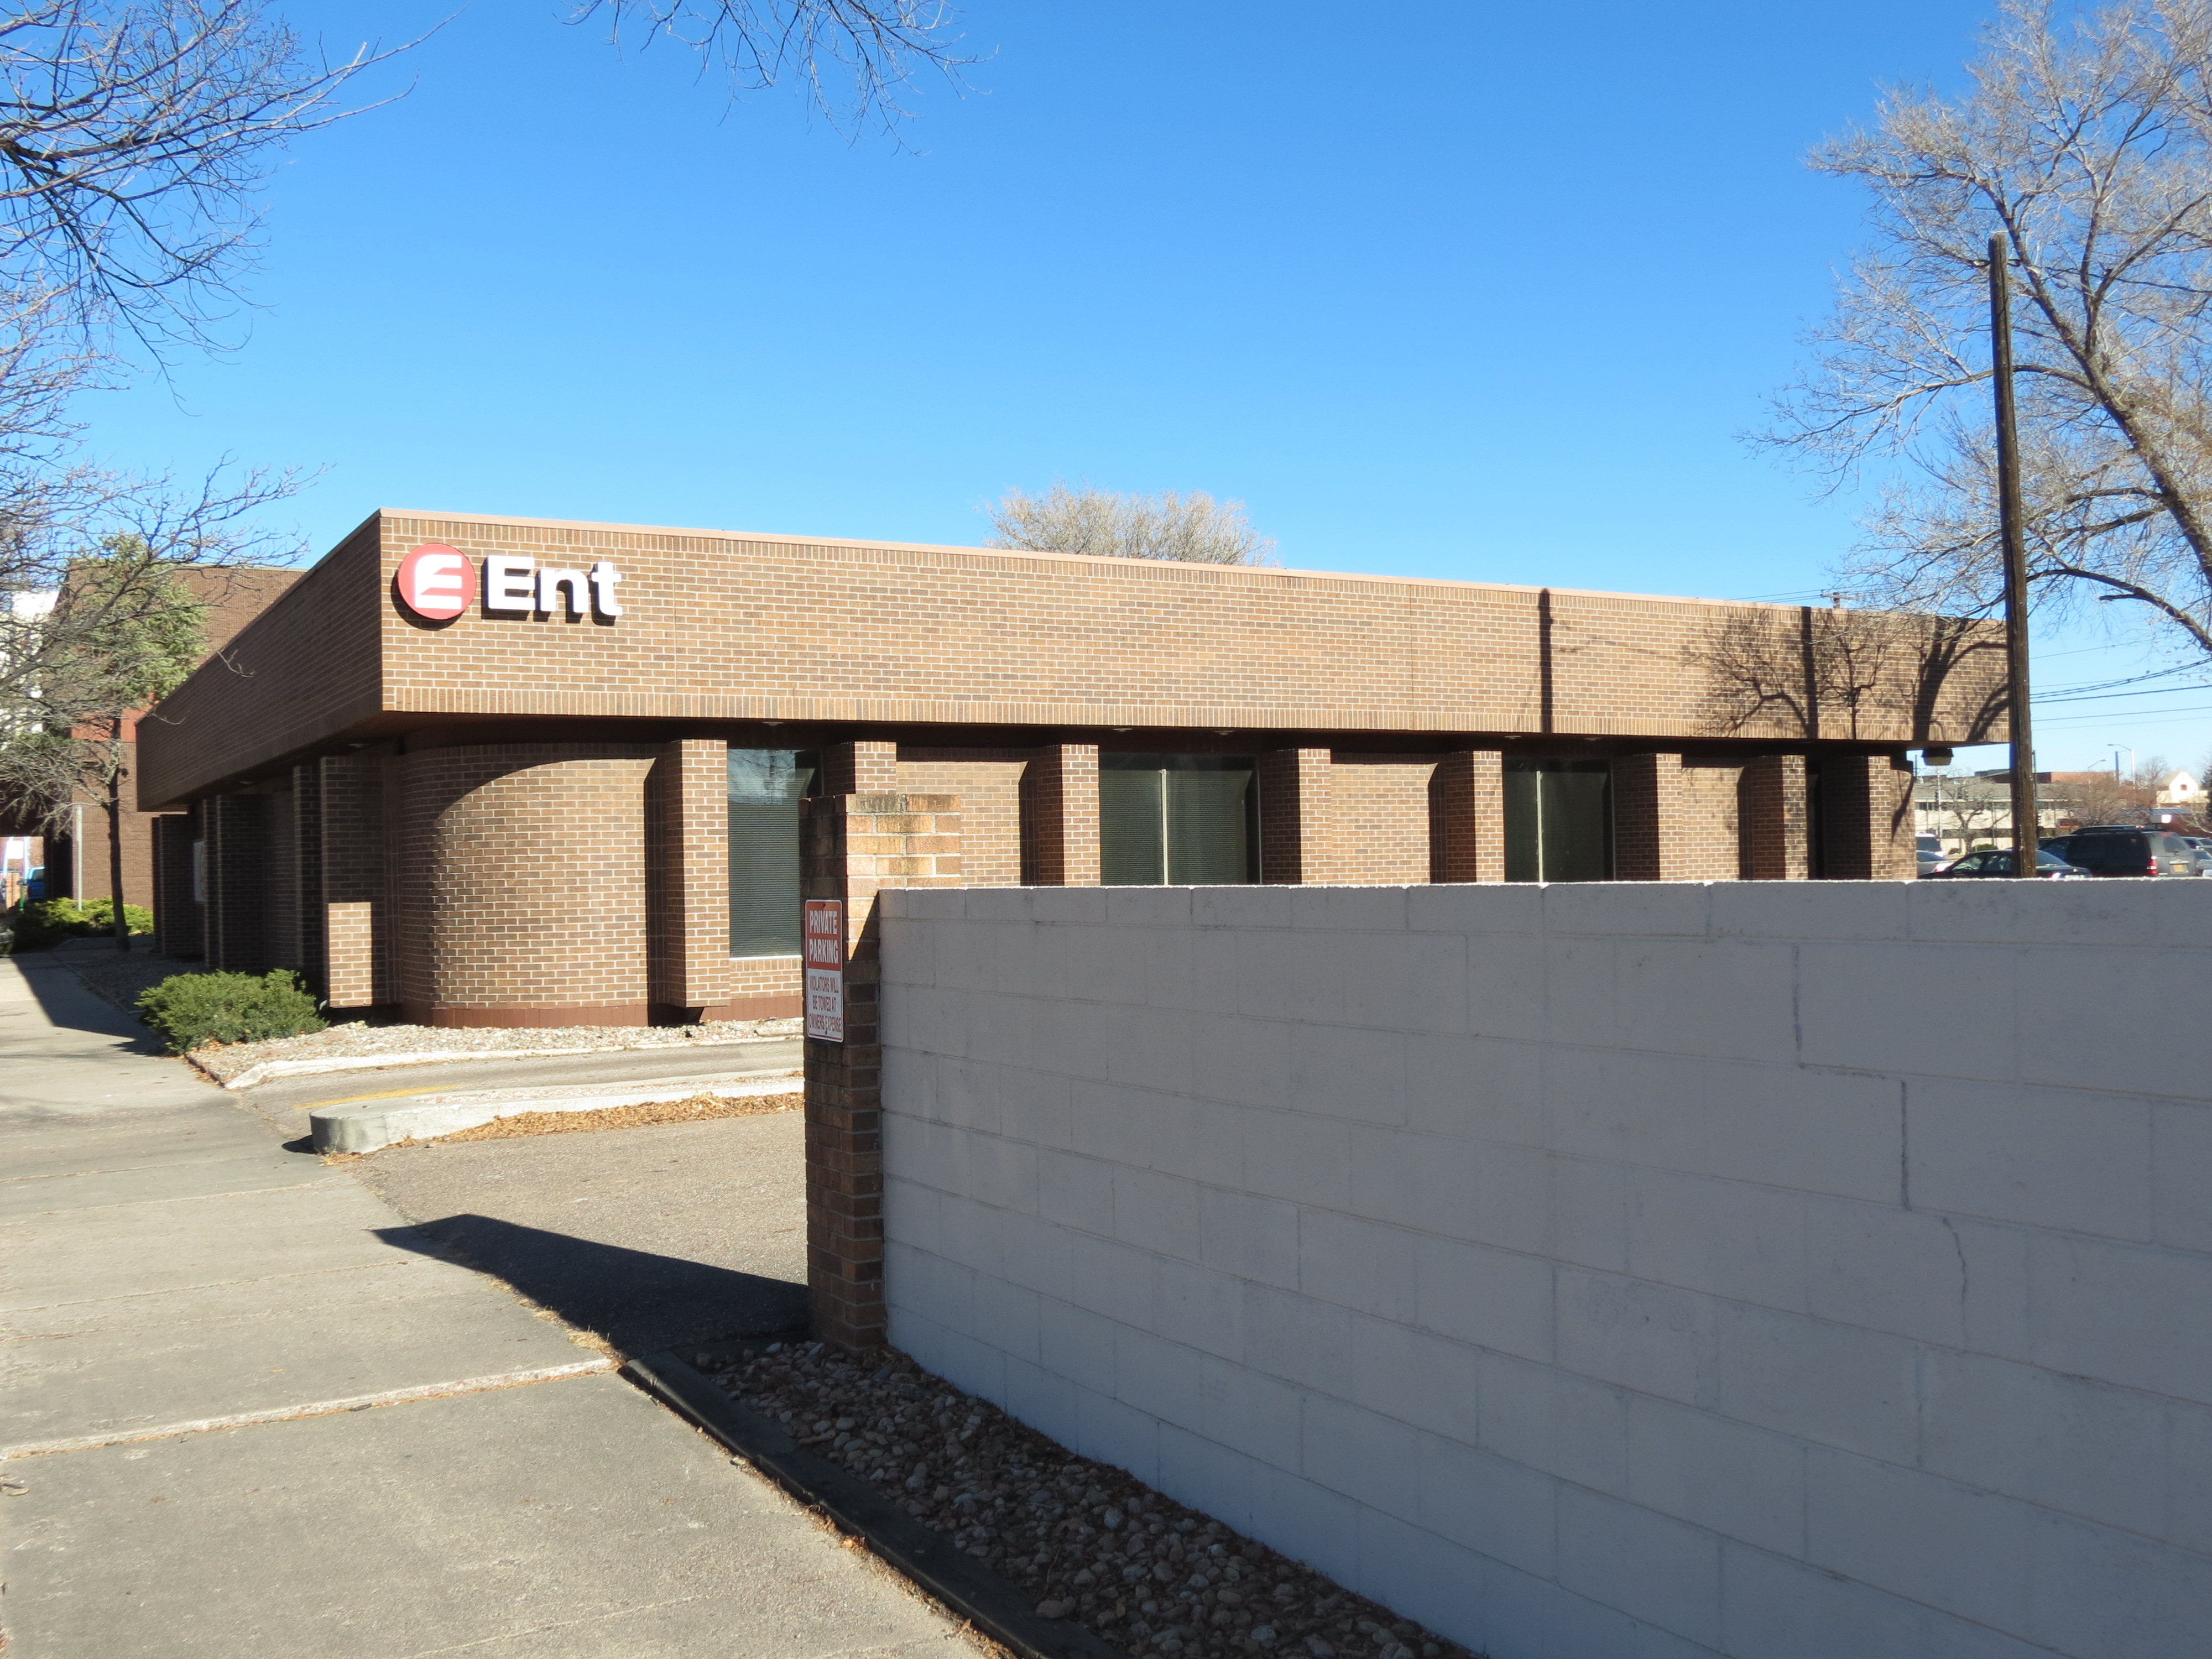 Ent Credit Union: Mountain Bell Service Center Photo